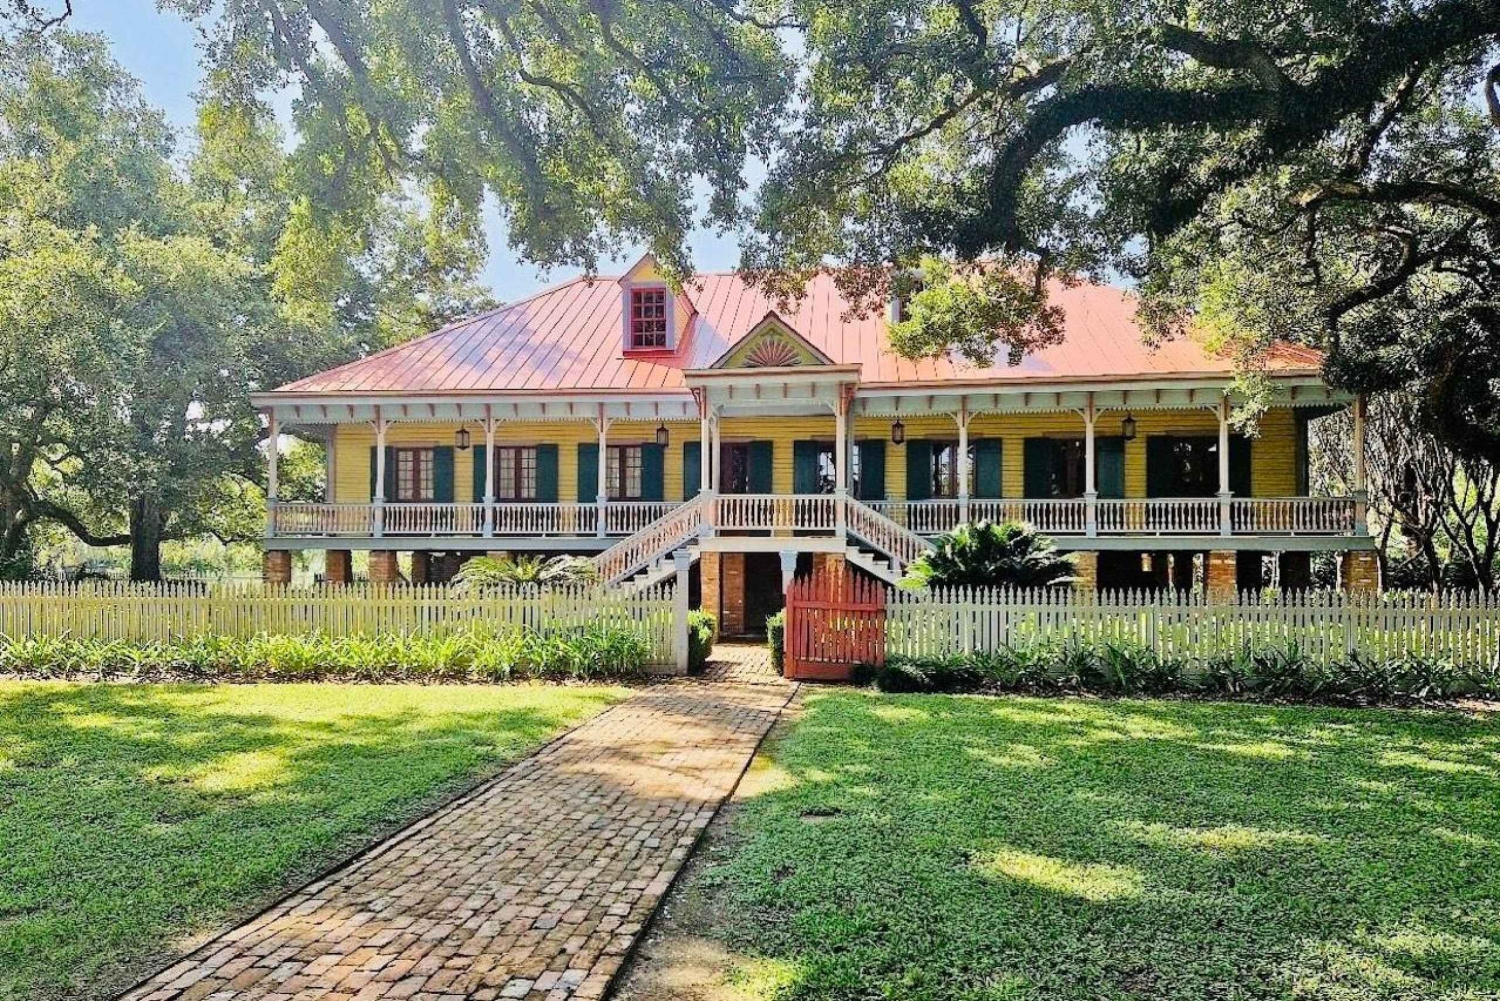 From New Orleans: Oak Alley or Laura Plantation Tour